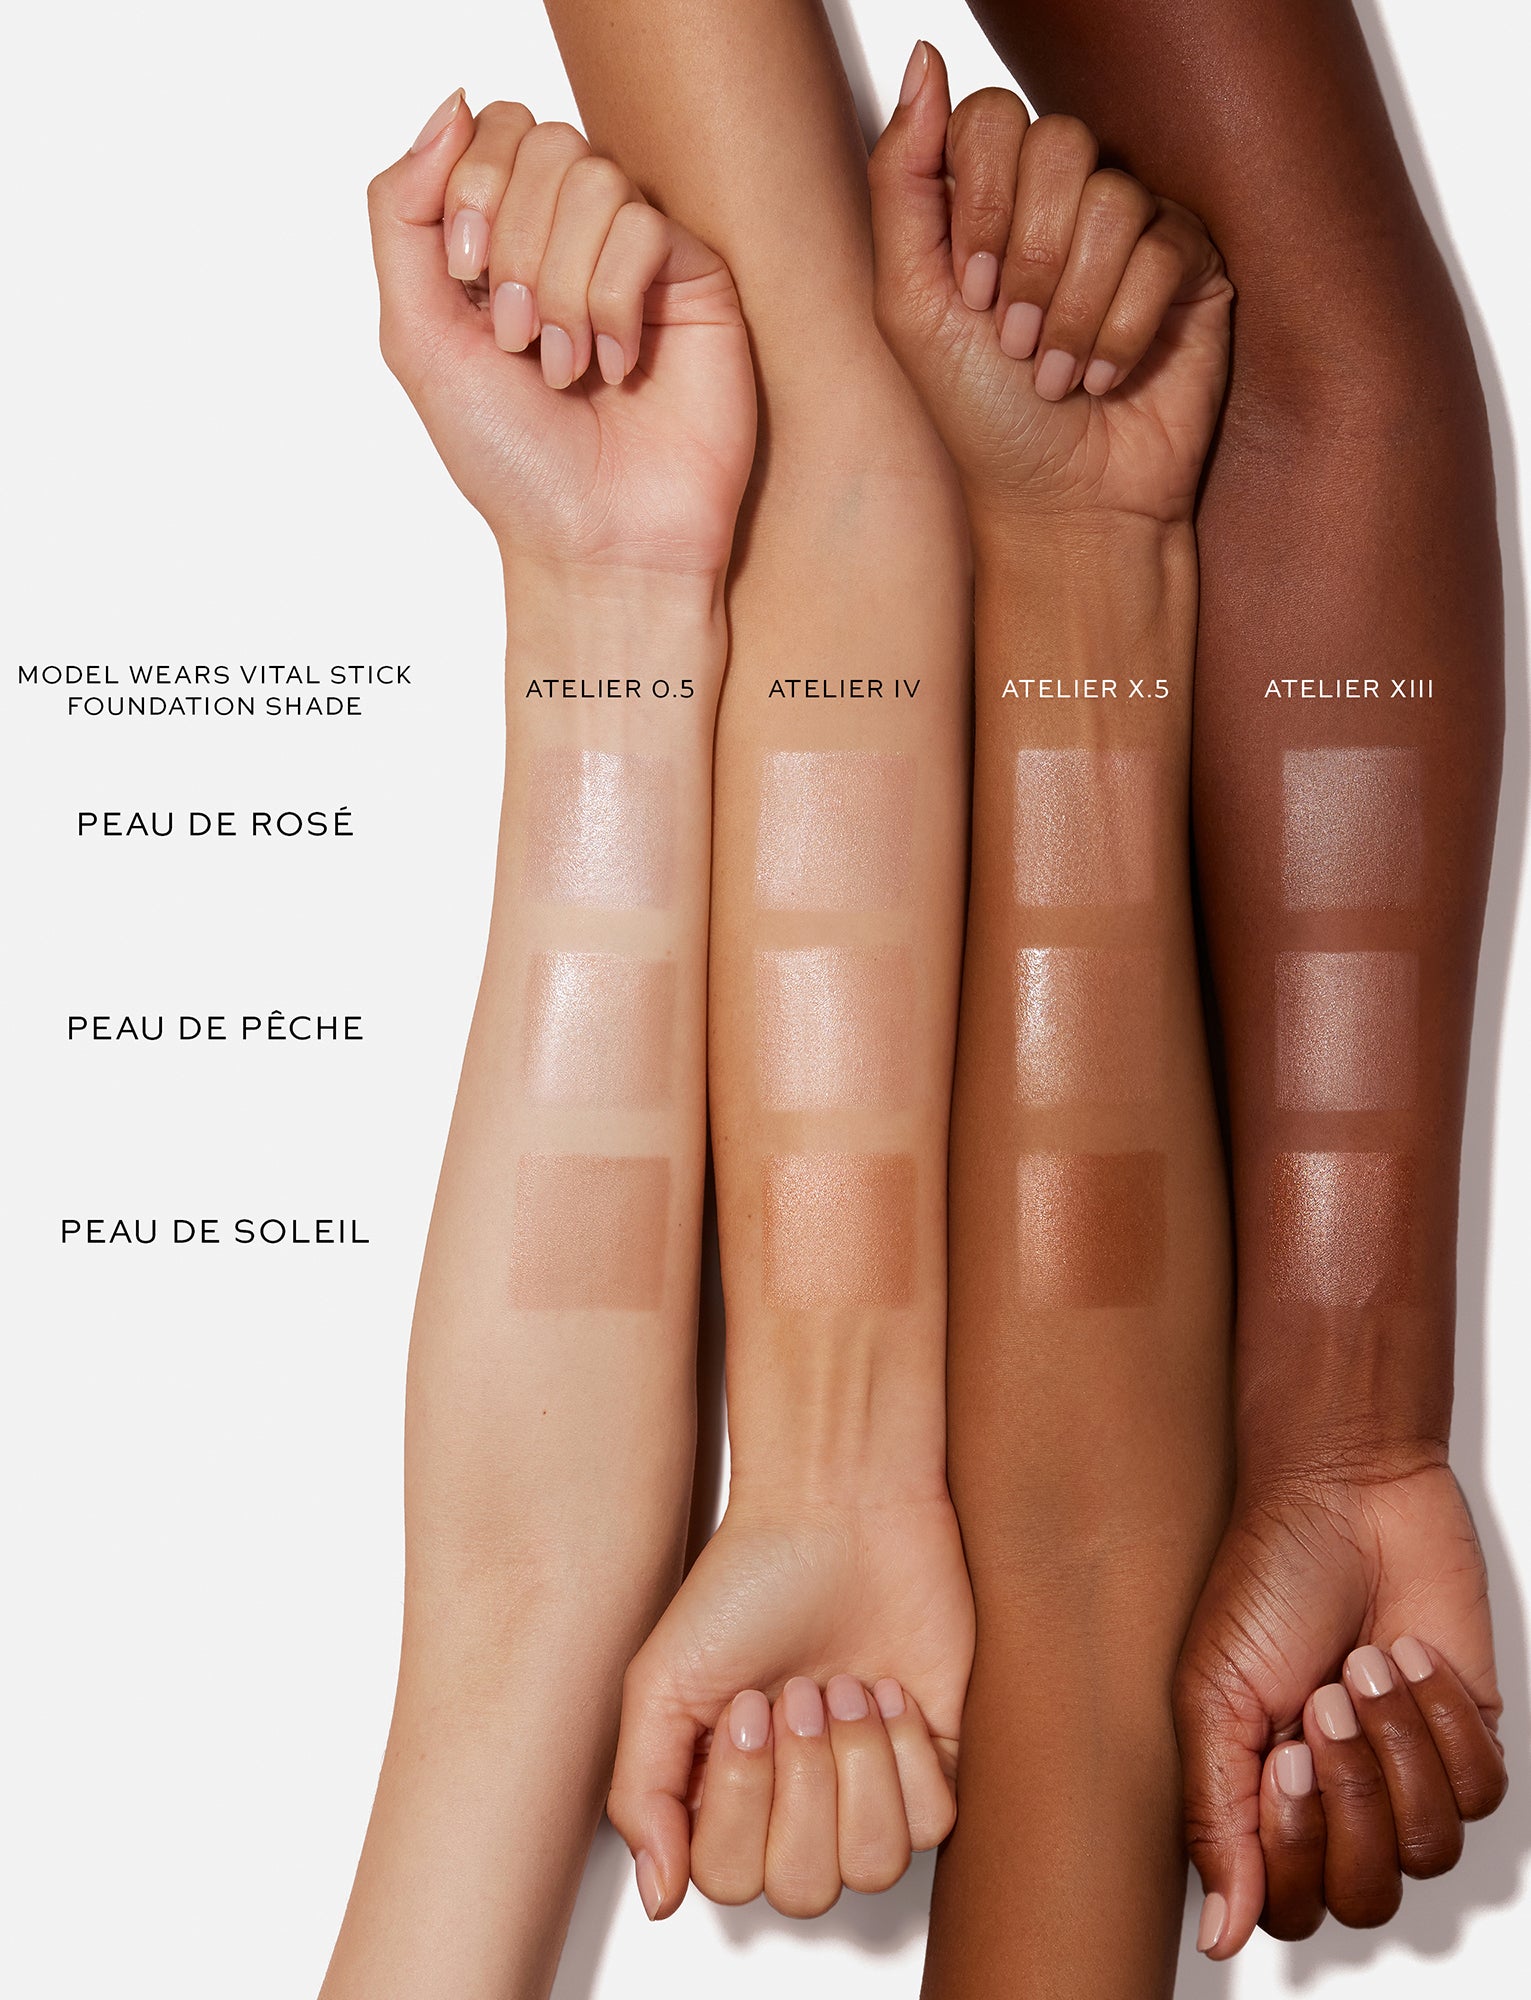  AnWestman Atelier Liquid Super Loaded Sheer Illuminator swatches on four arms